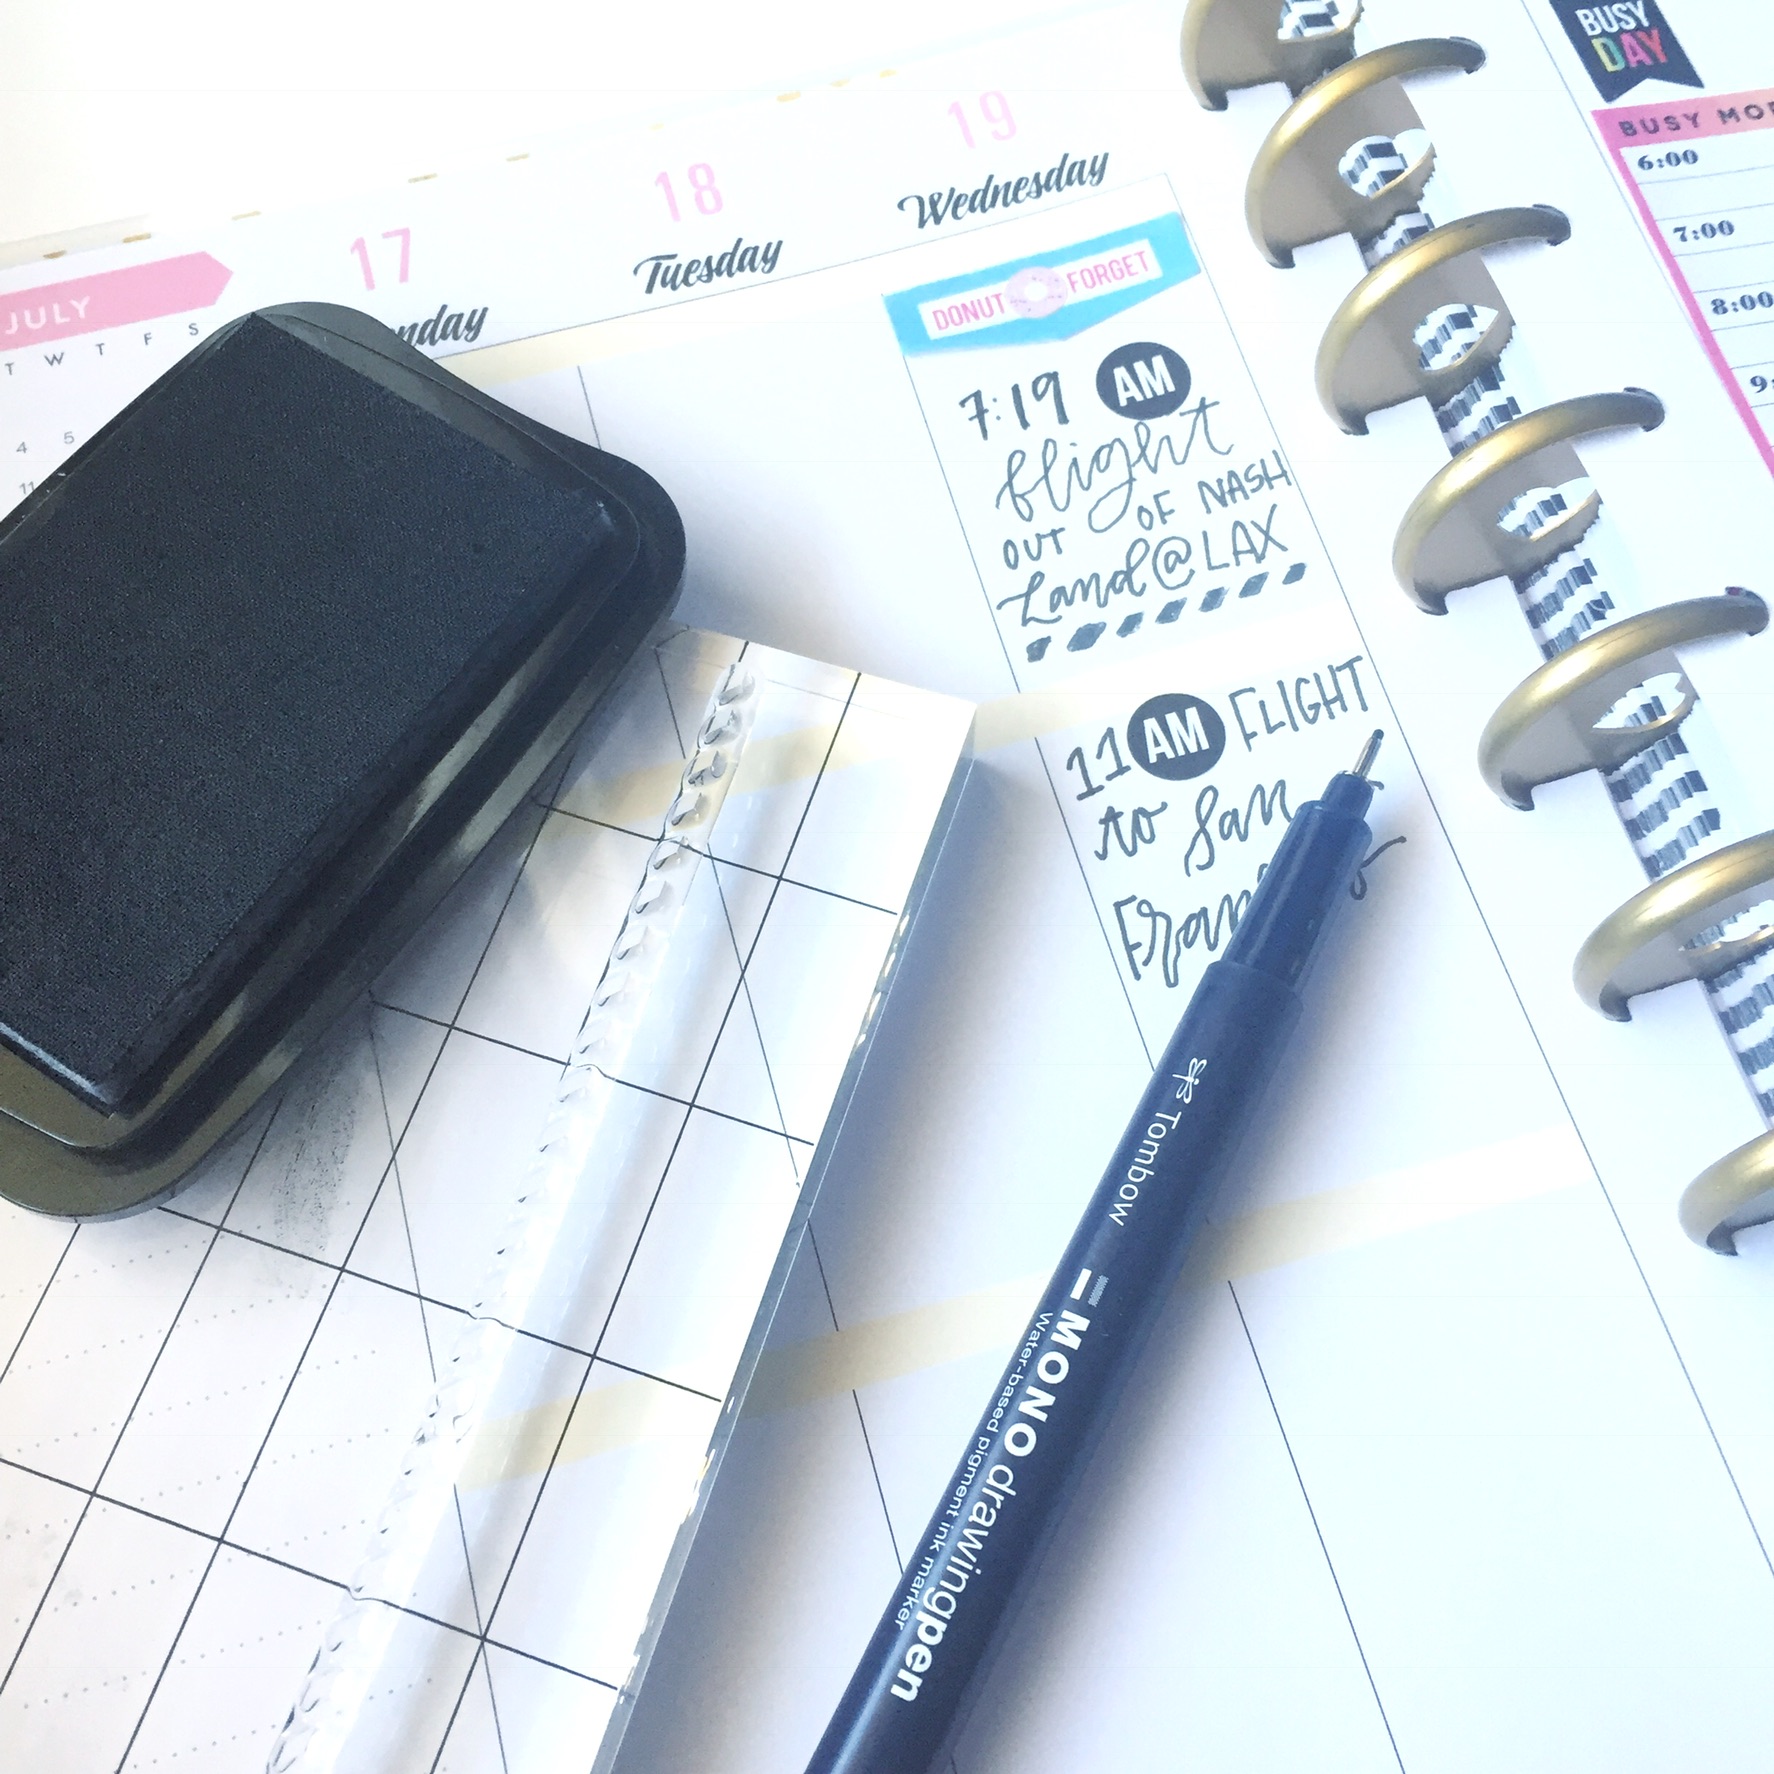 Learn some techniques for how to add color and patterns to your planner with @waffleflower and @tombowusa products. Lauren of @renmadecalligraphy (renmadecalligraphy.com) loves to give lettering and crafting tips! 